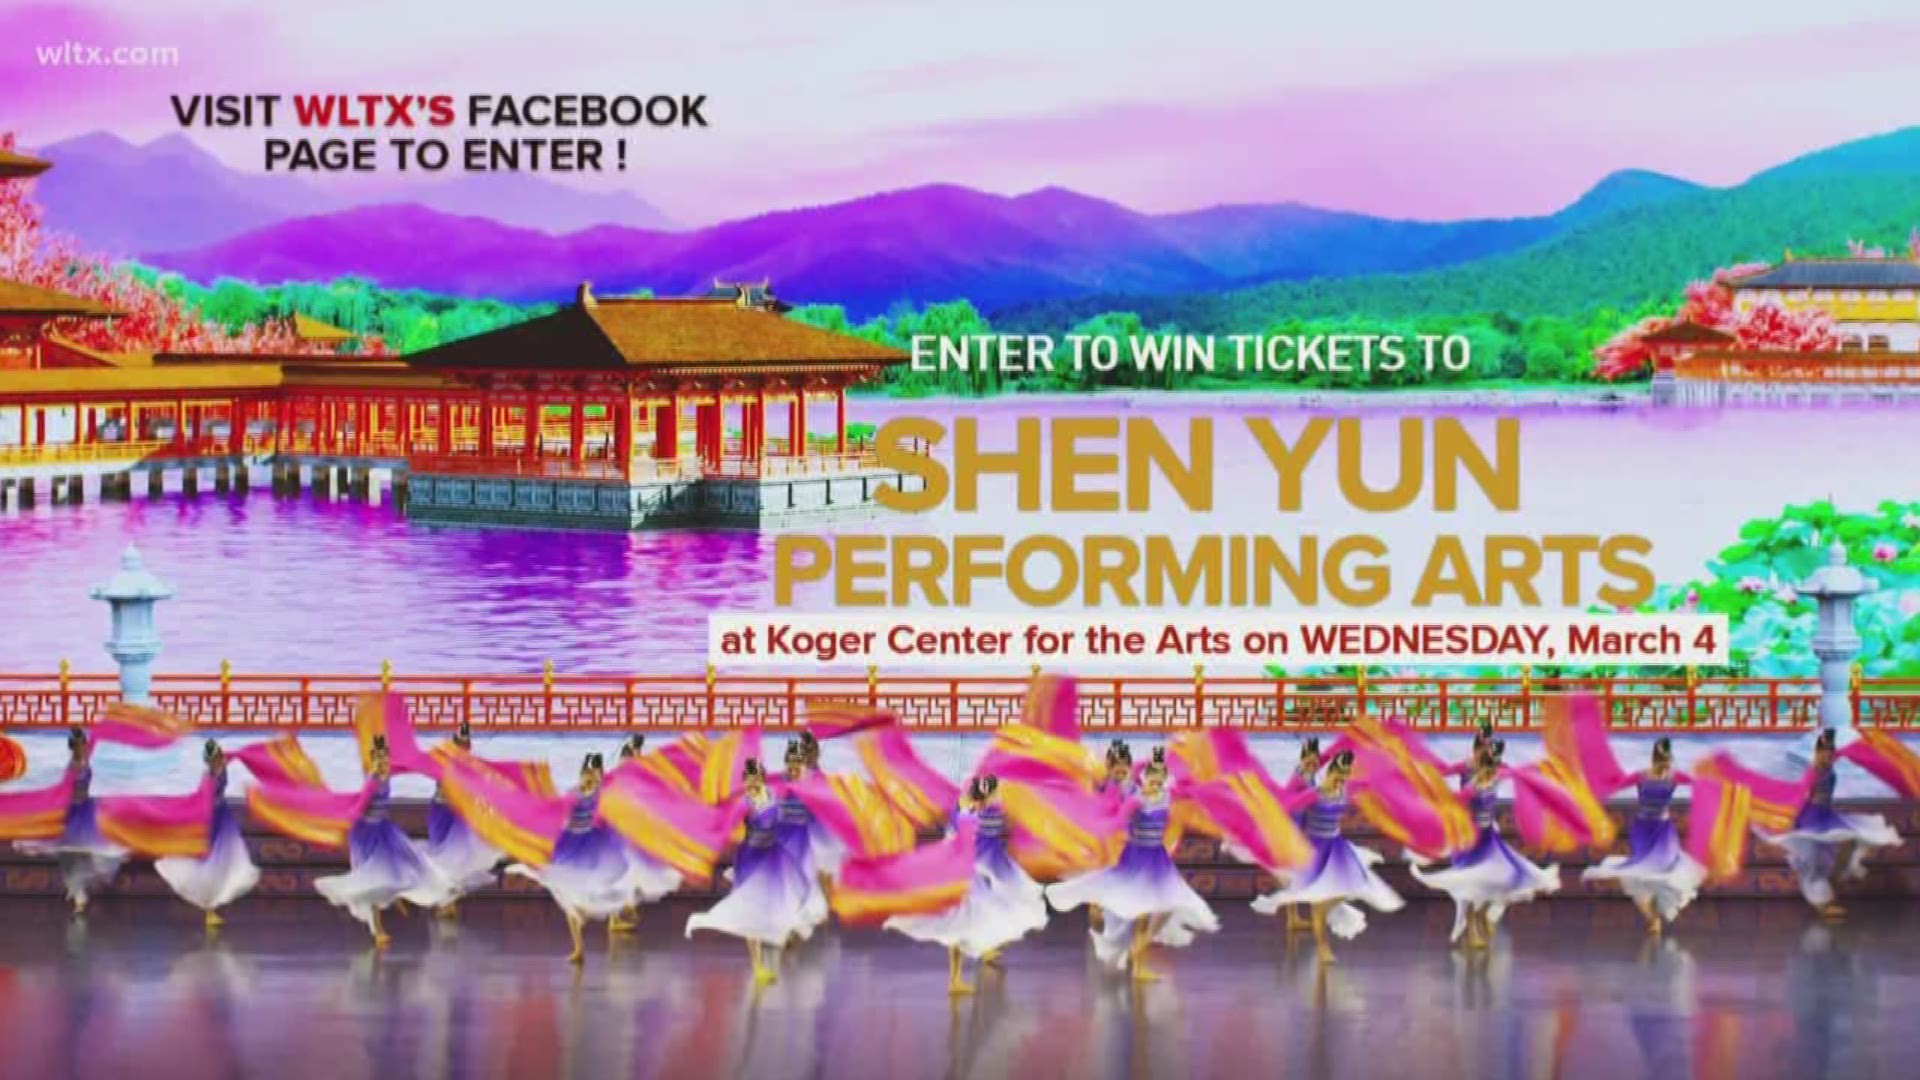 News19 is giving away tickets to see Shen Yun at the Koger Center.  The contest runs from January 20, 2020 until January 24, 2020.  The event is on March 4, 2020.